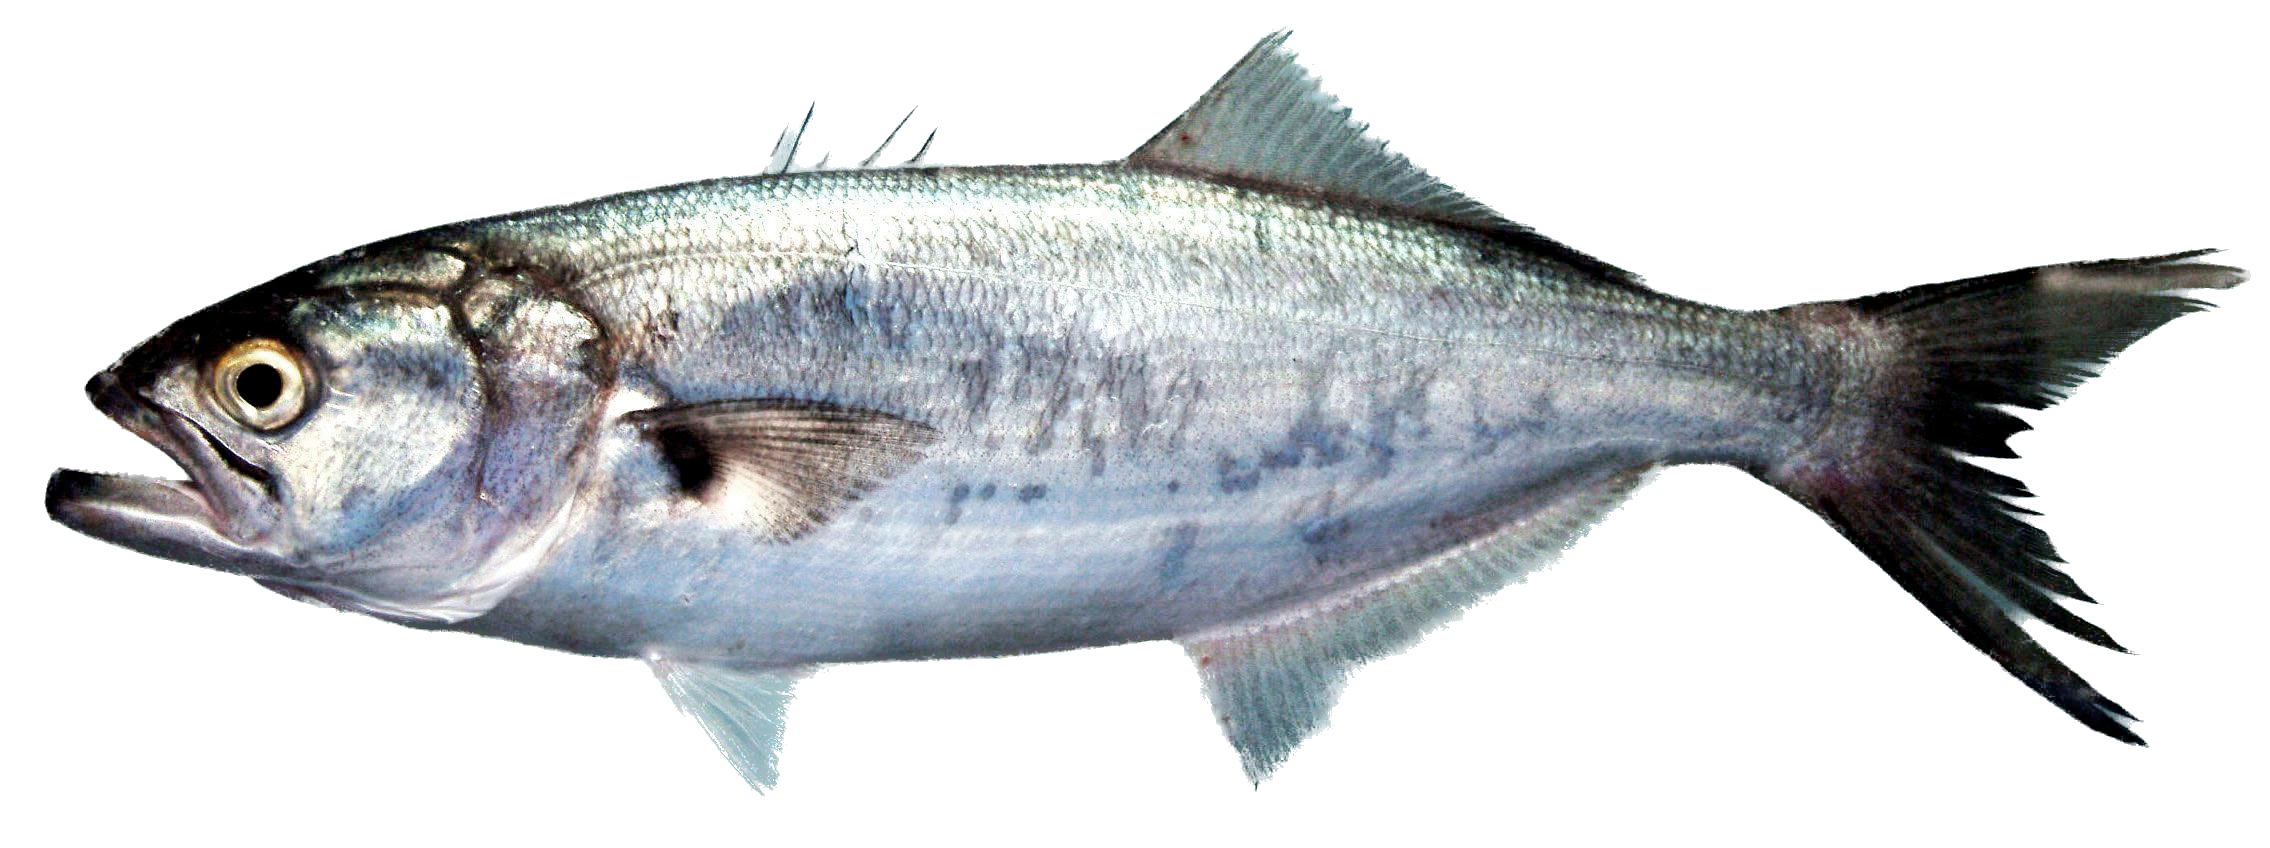 The bluefish (Pomatomus saltatrix) is the only extant species of the family Pomatomidae.